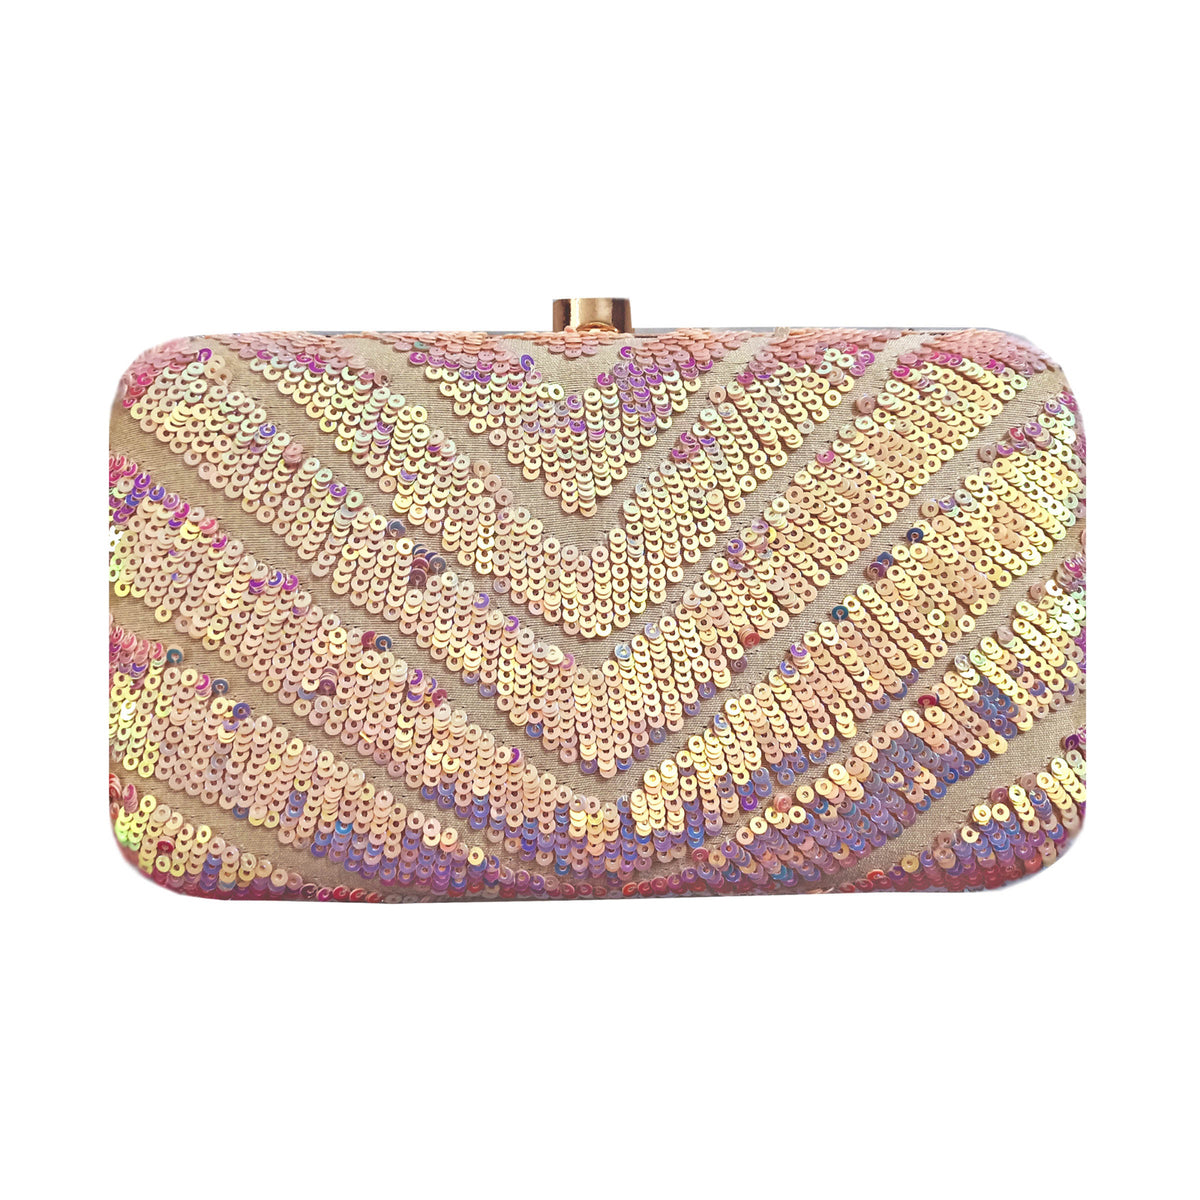 Radiant shimmer handembroidered clutch